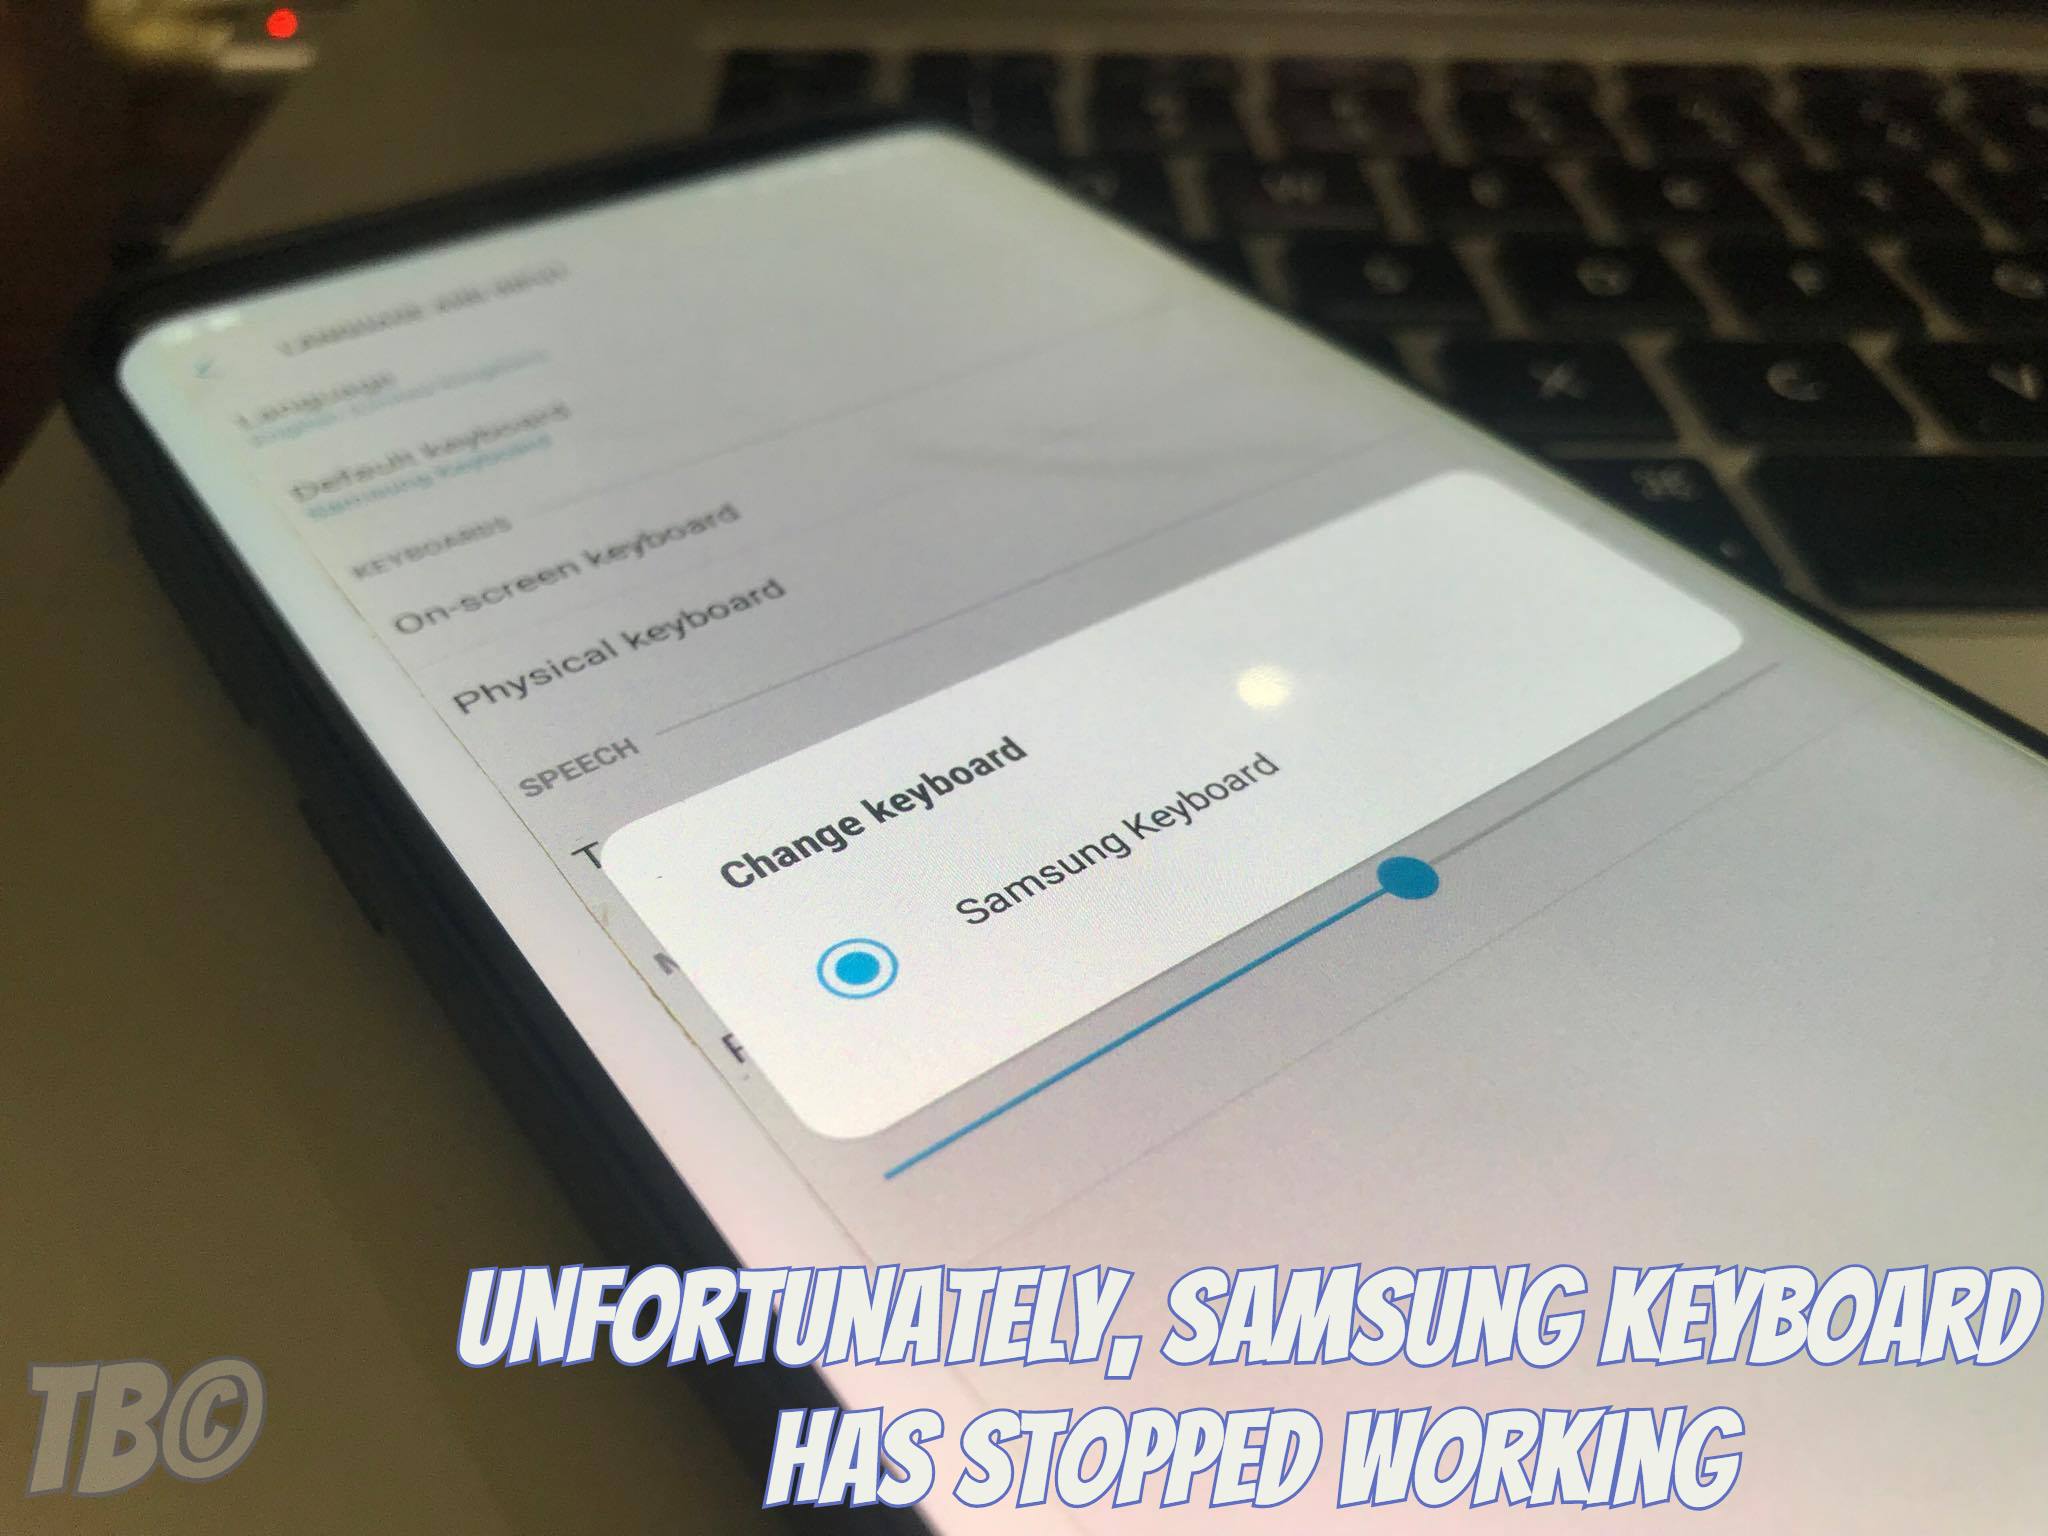 Samsung Keyboard Has Stopped